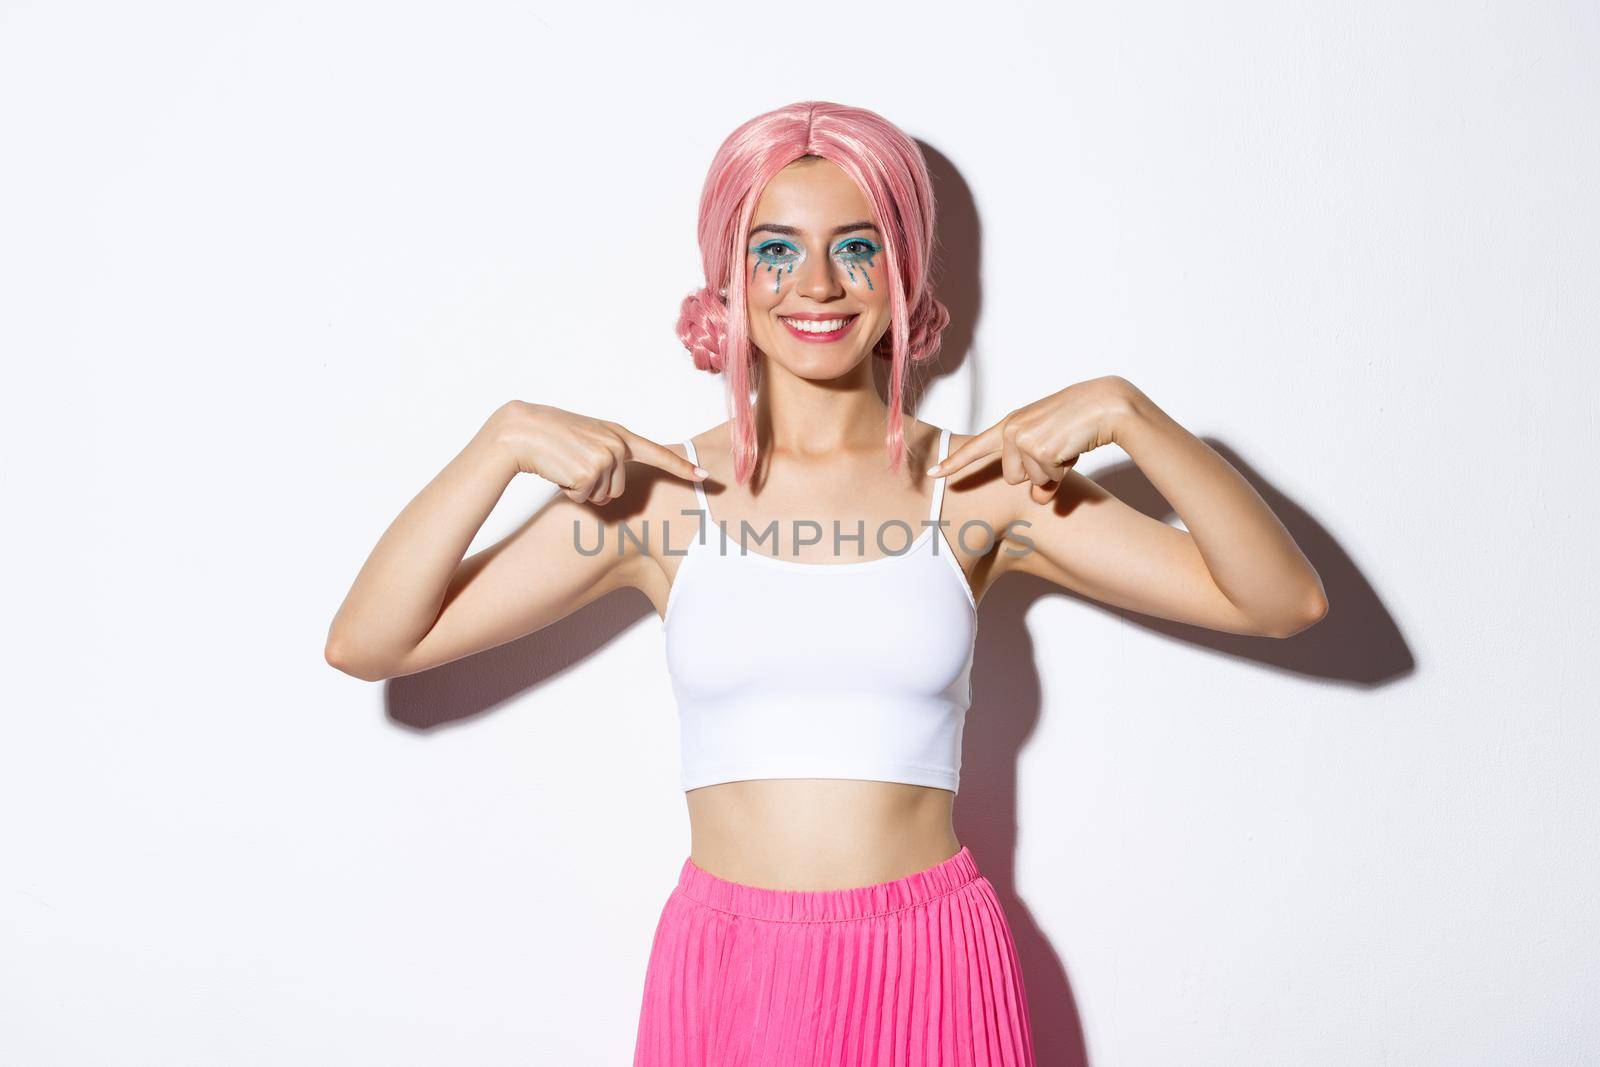 Portrait of cheerful party girl with pink wig and bright makeup, pointing at herself and smiling confident, showing her halloween outfit, standing over white background by Benzoix